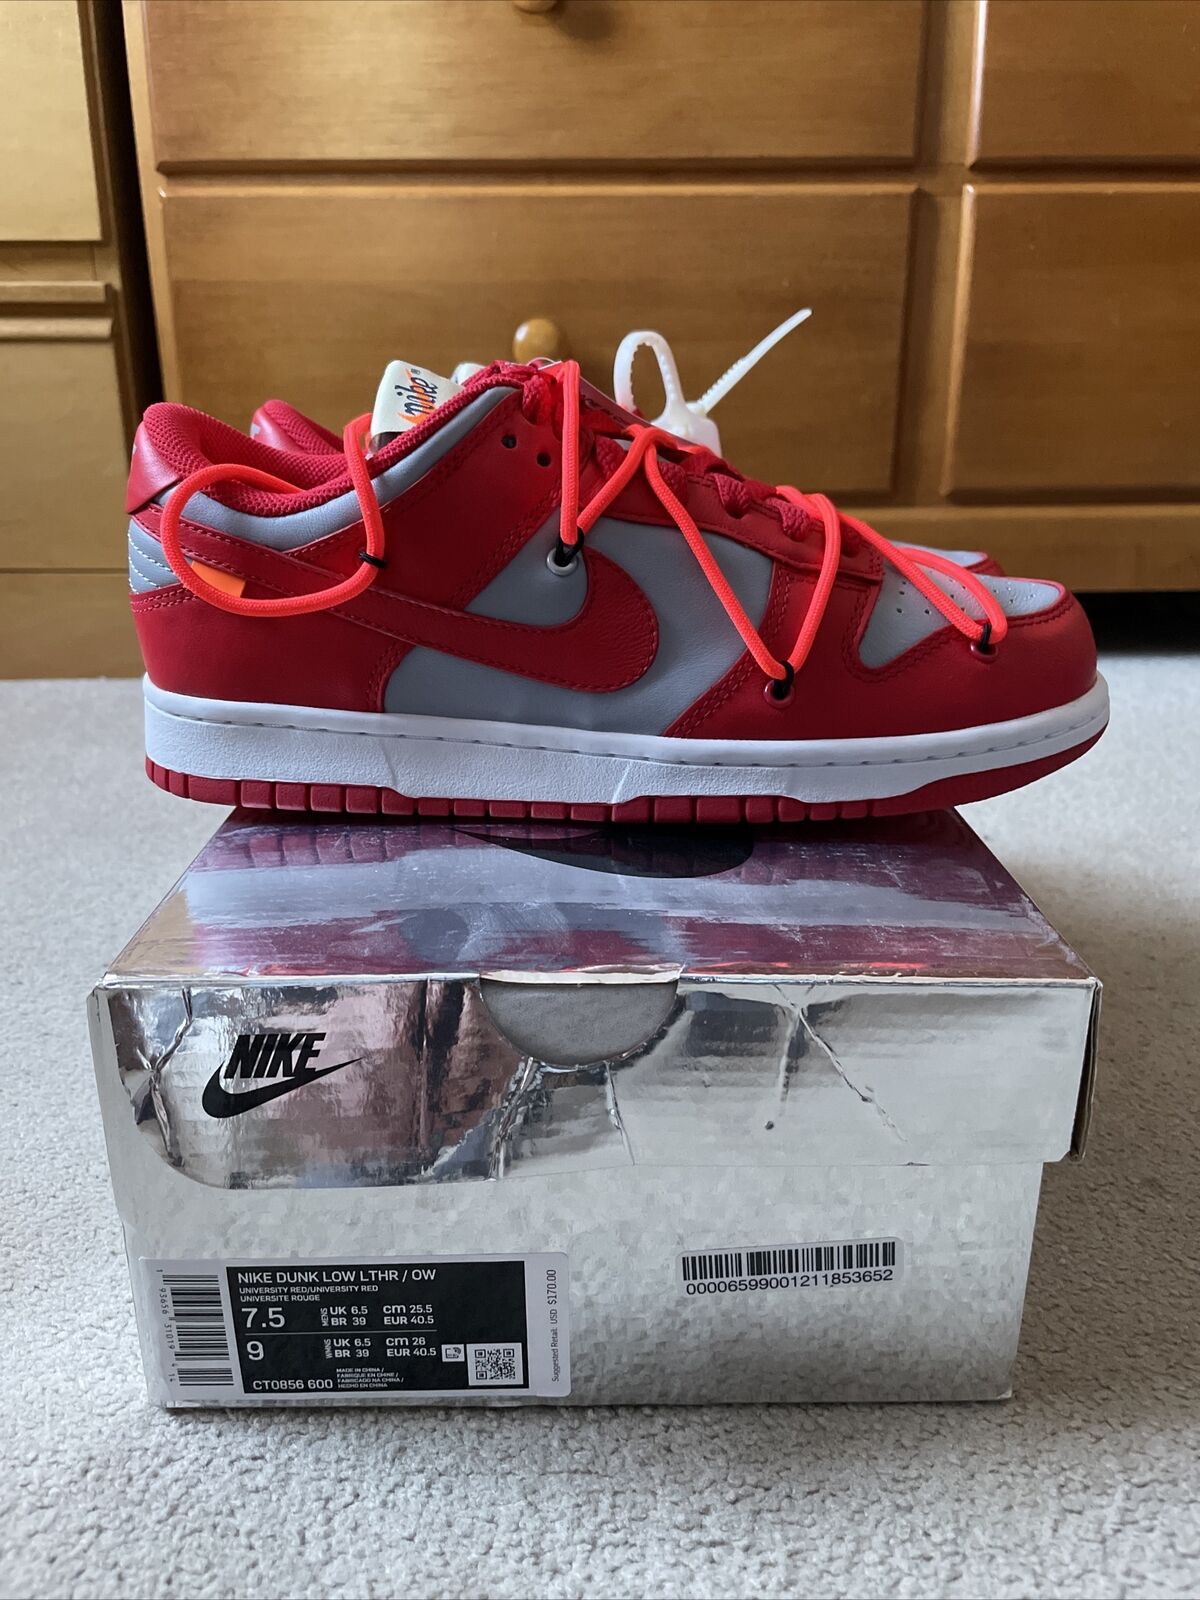 Nike Dunk Low LTHR/OW “ Off White “ Sz 7.5 New 100% Authentic University  Red !